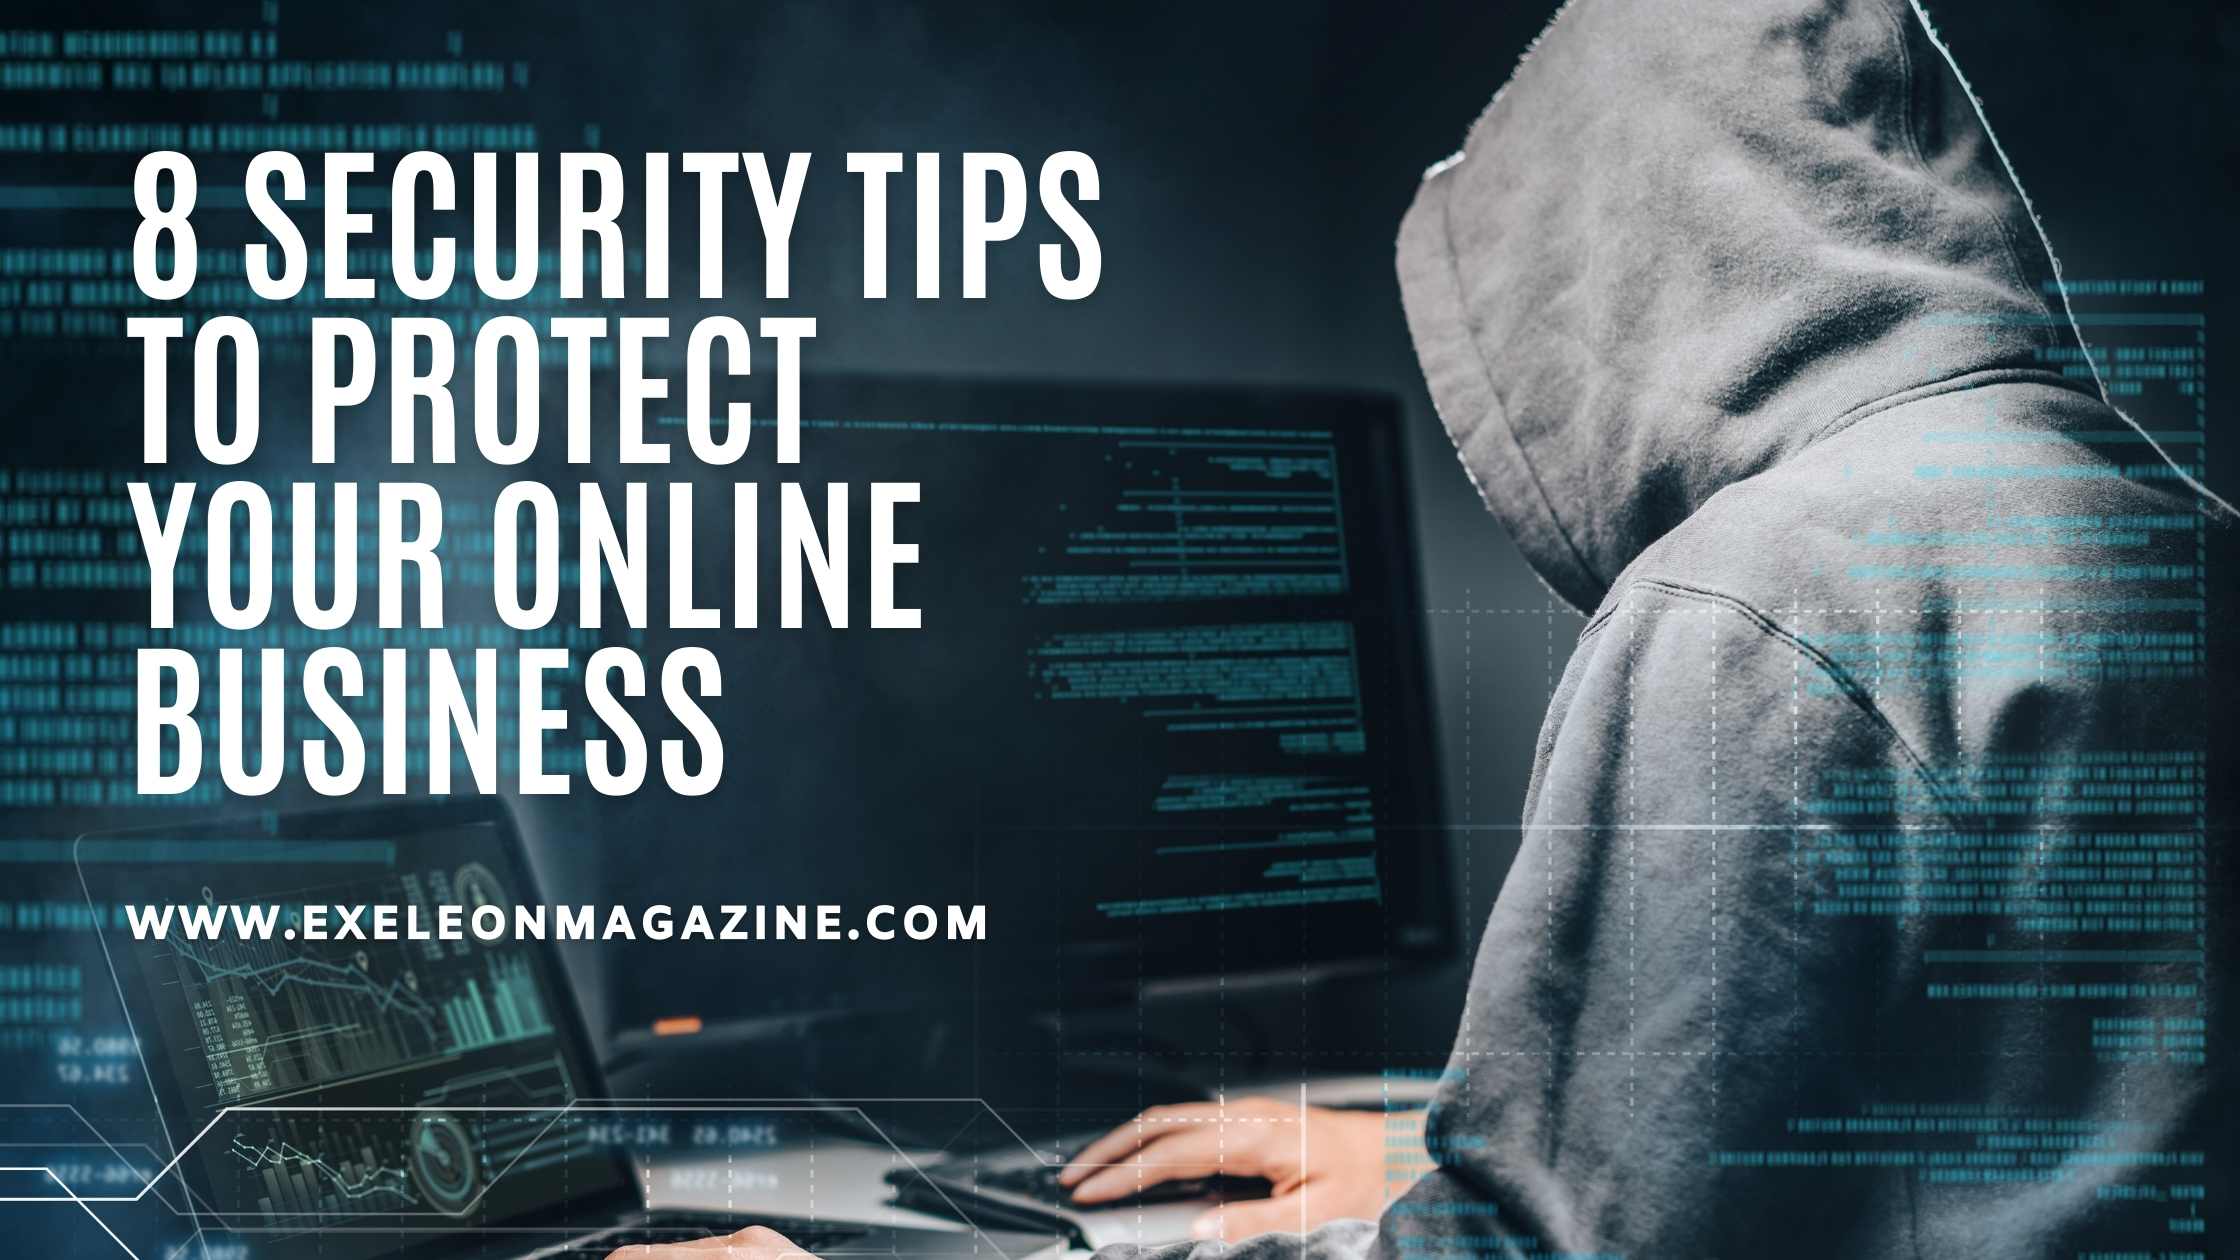 Protect your Online Business